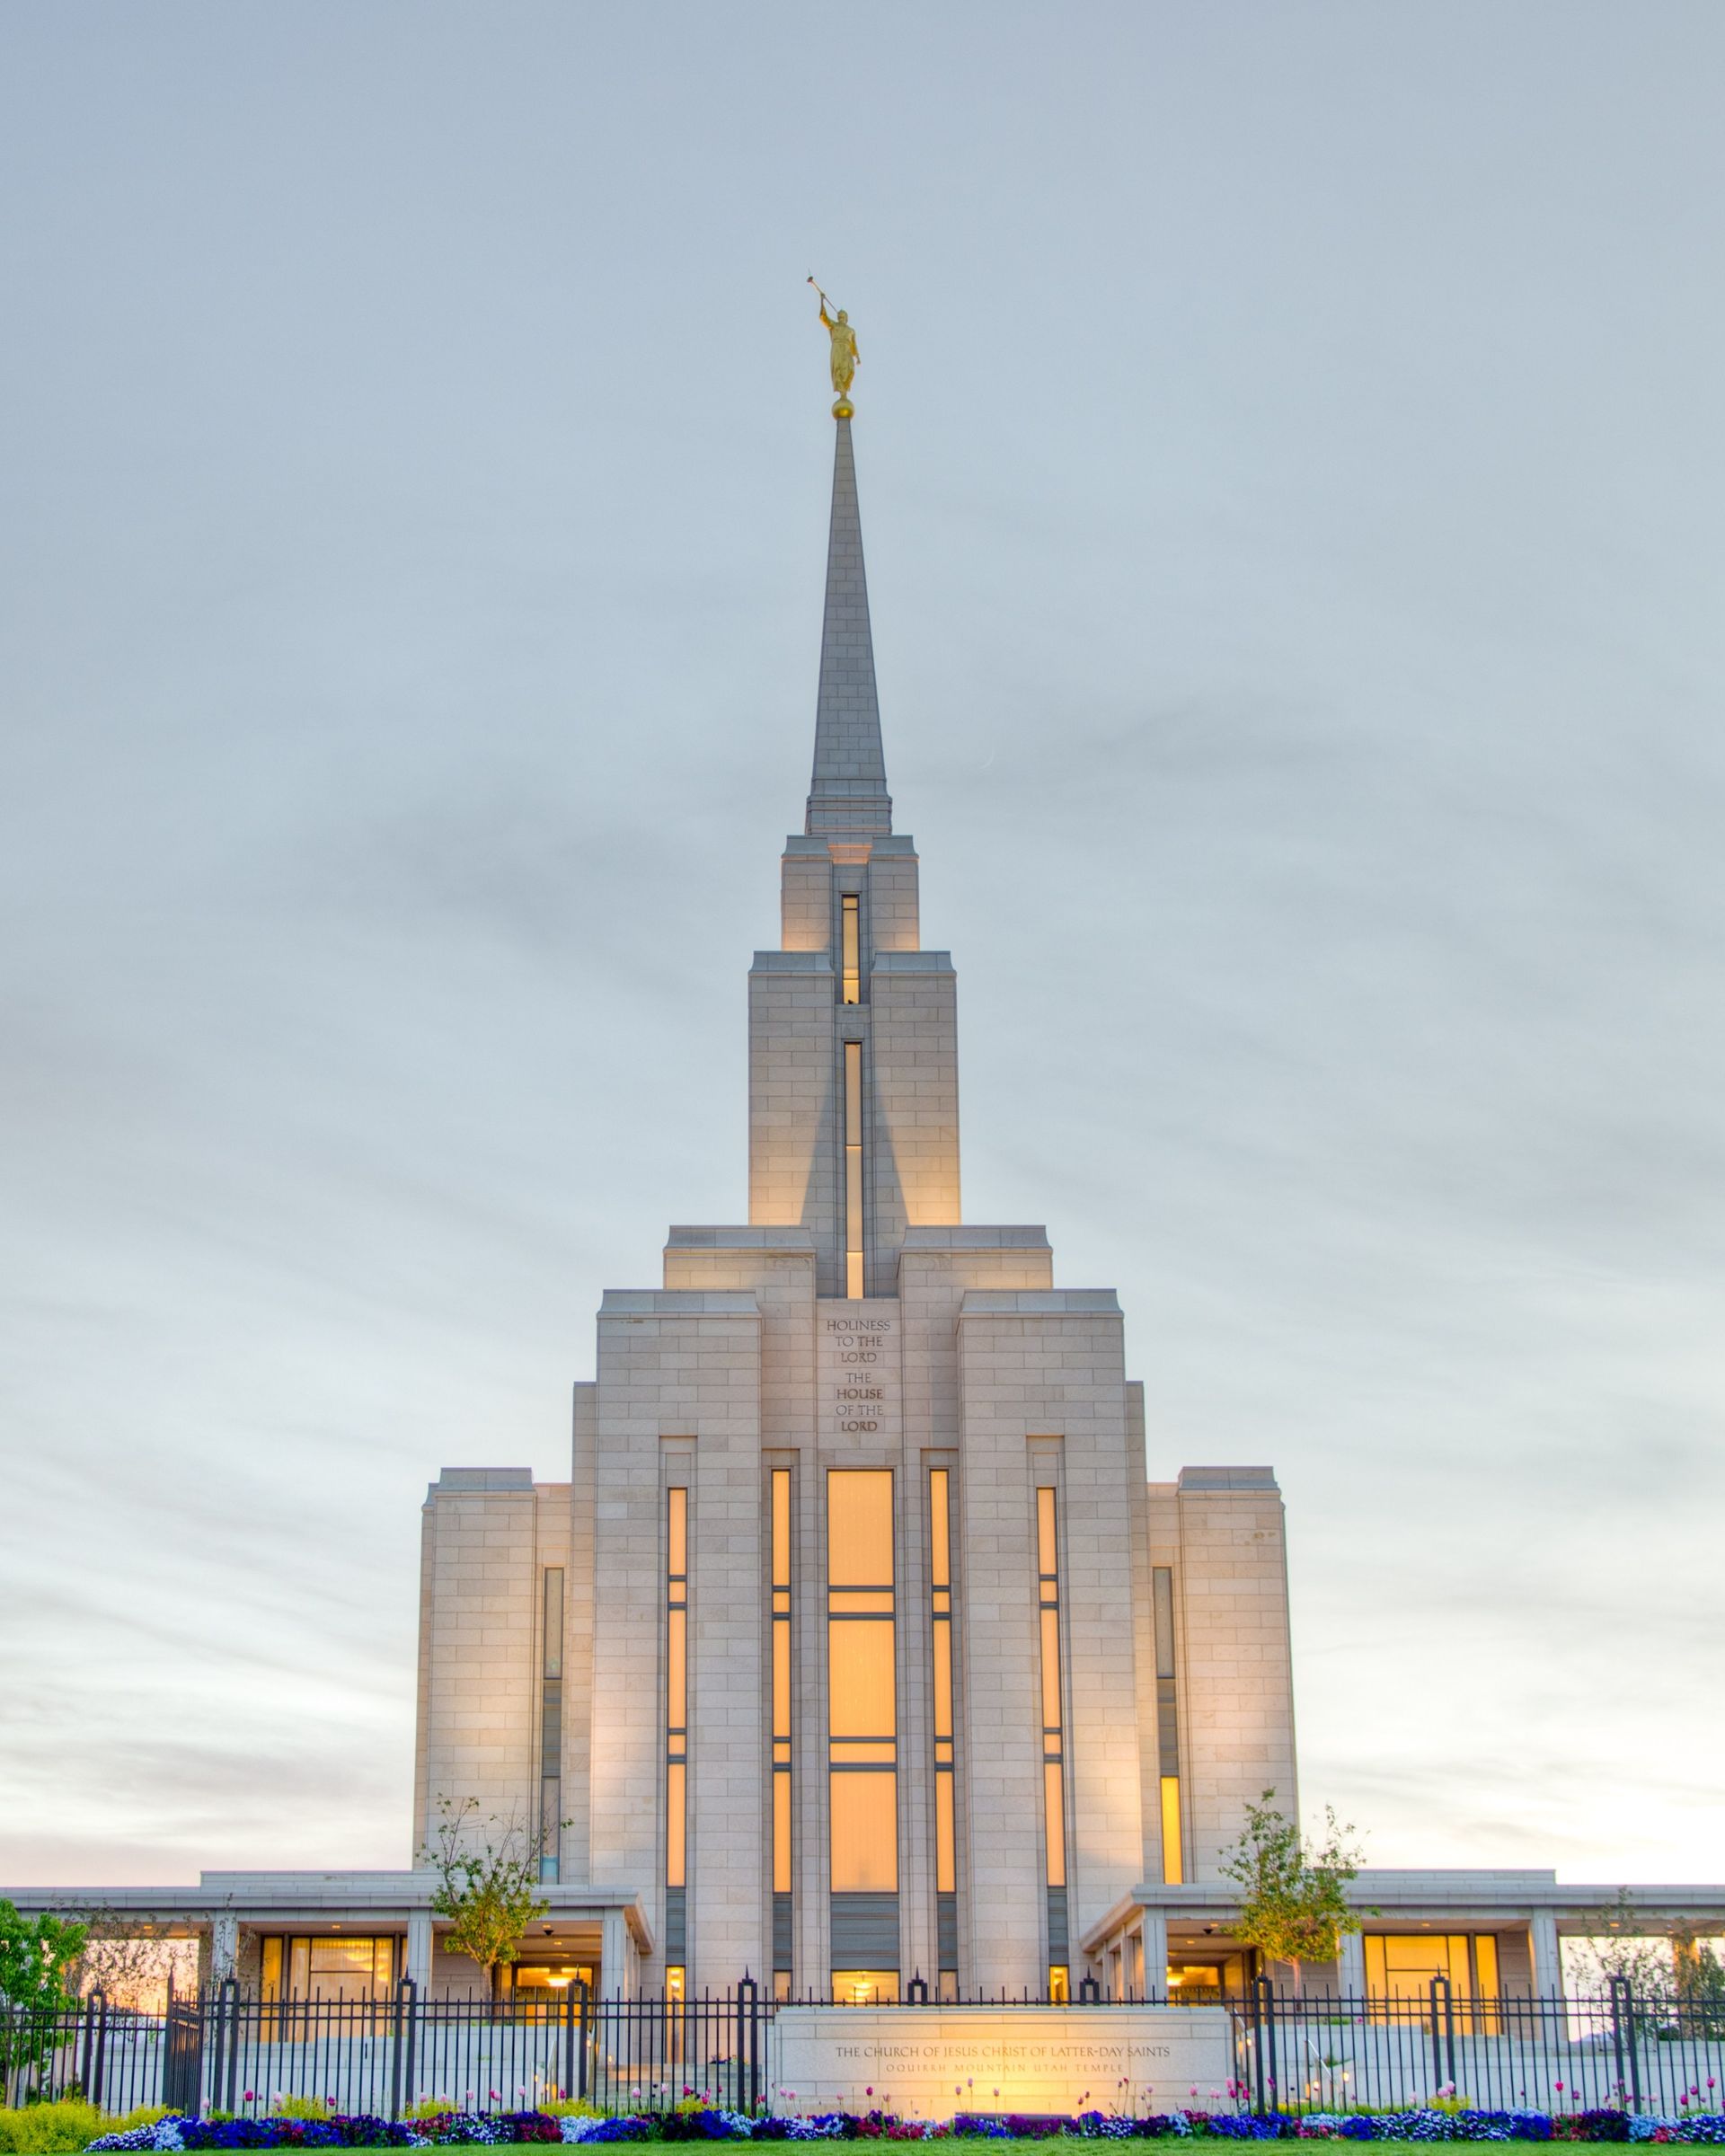 The Oquirrh Mountain Utah Temple, including the name sign, entrance, and scenery.